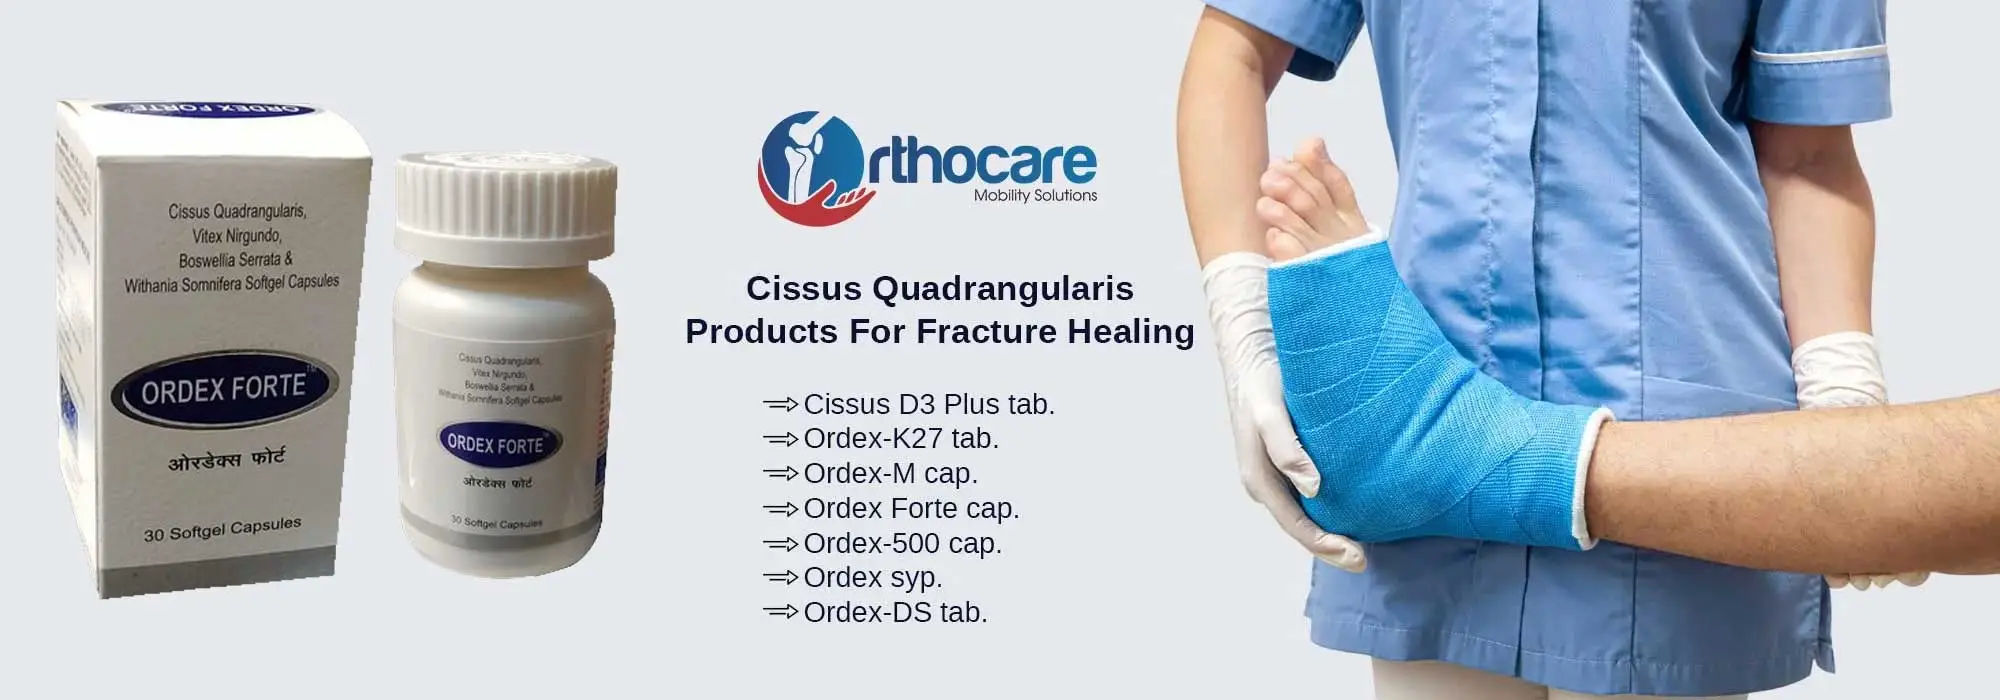 Cissus Quadrangularis Products For Fracture Healing Suppliers in Chamoli